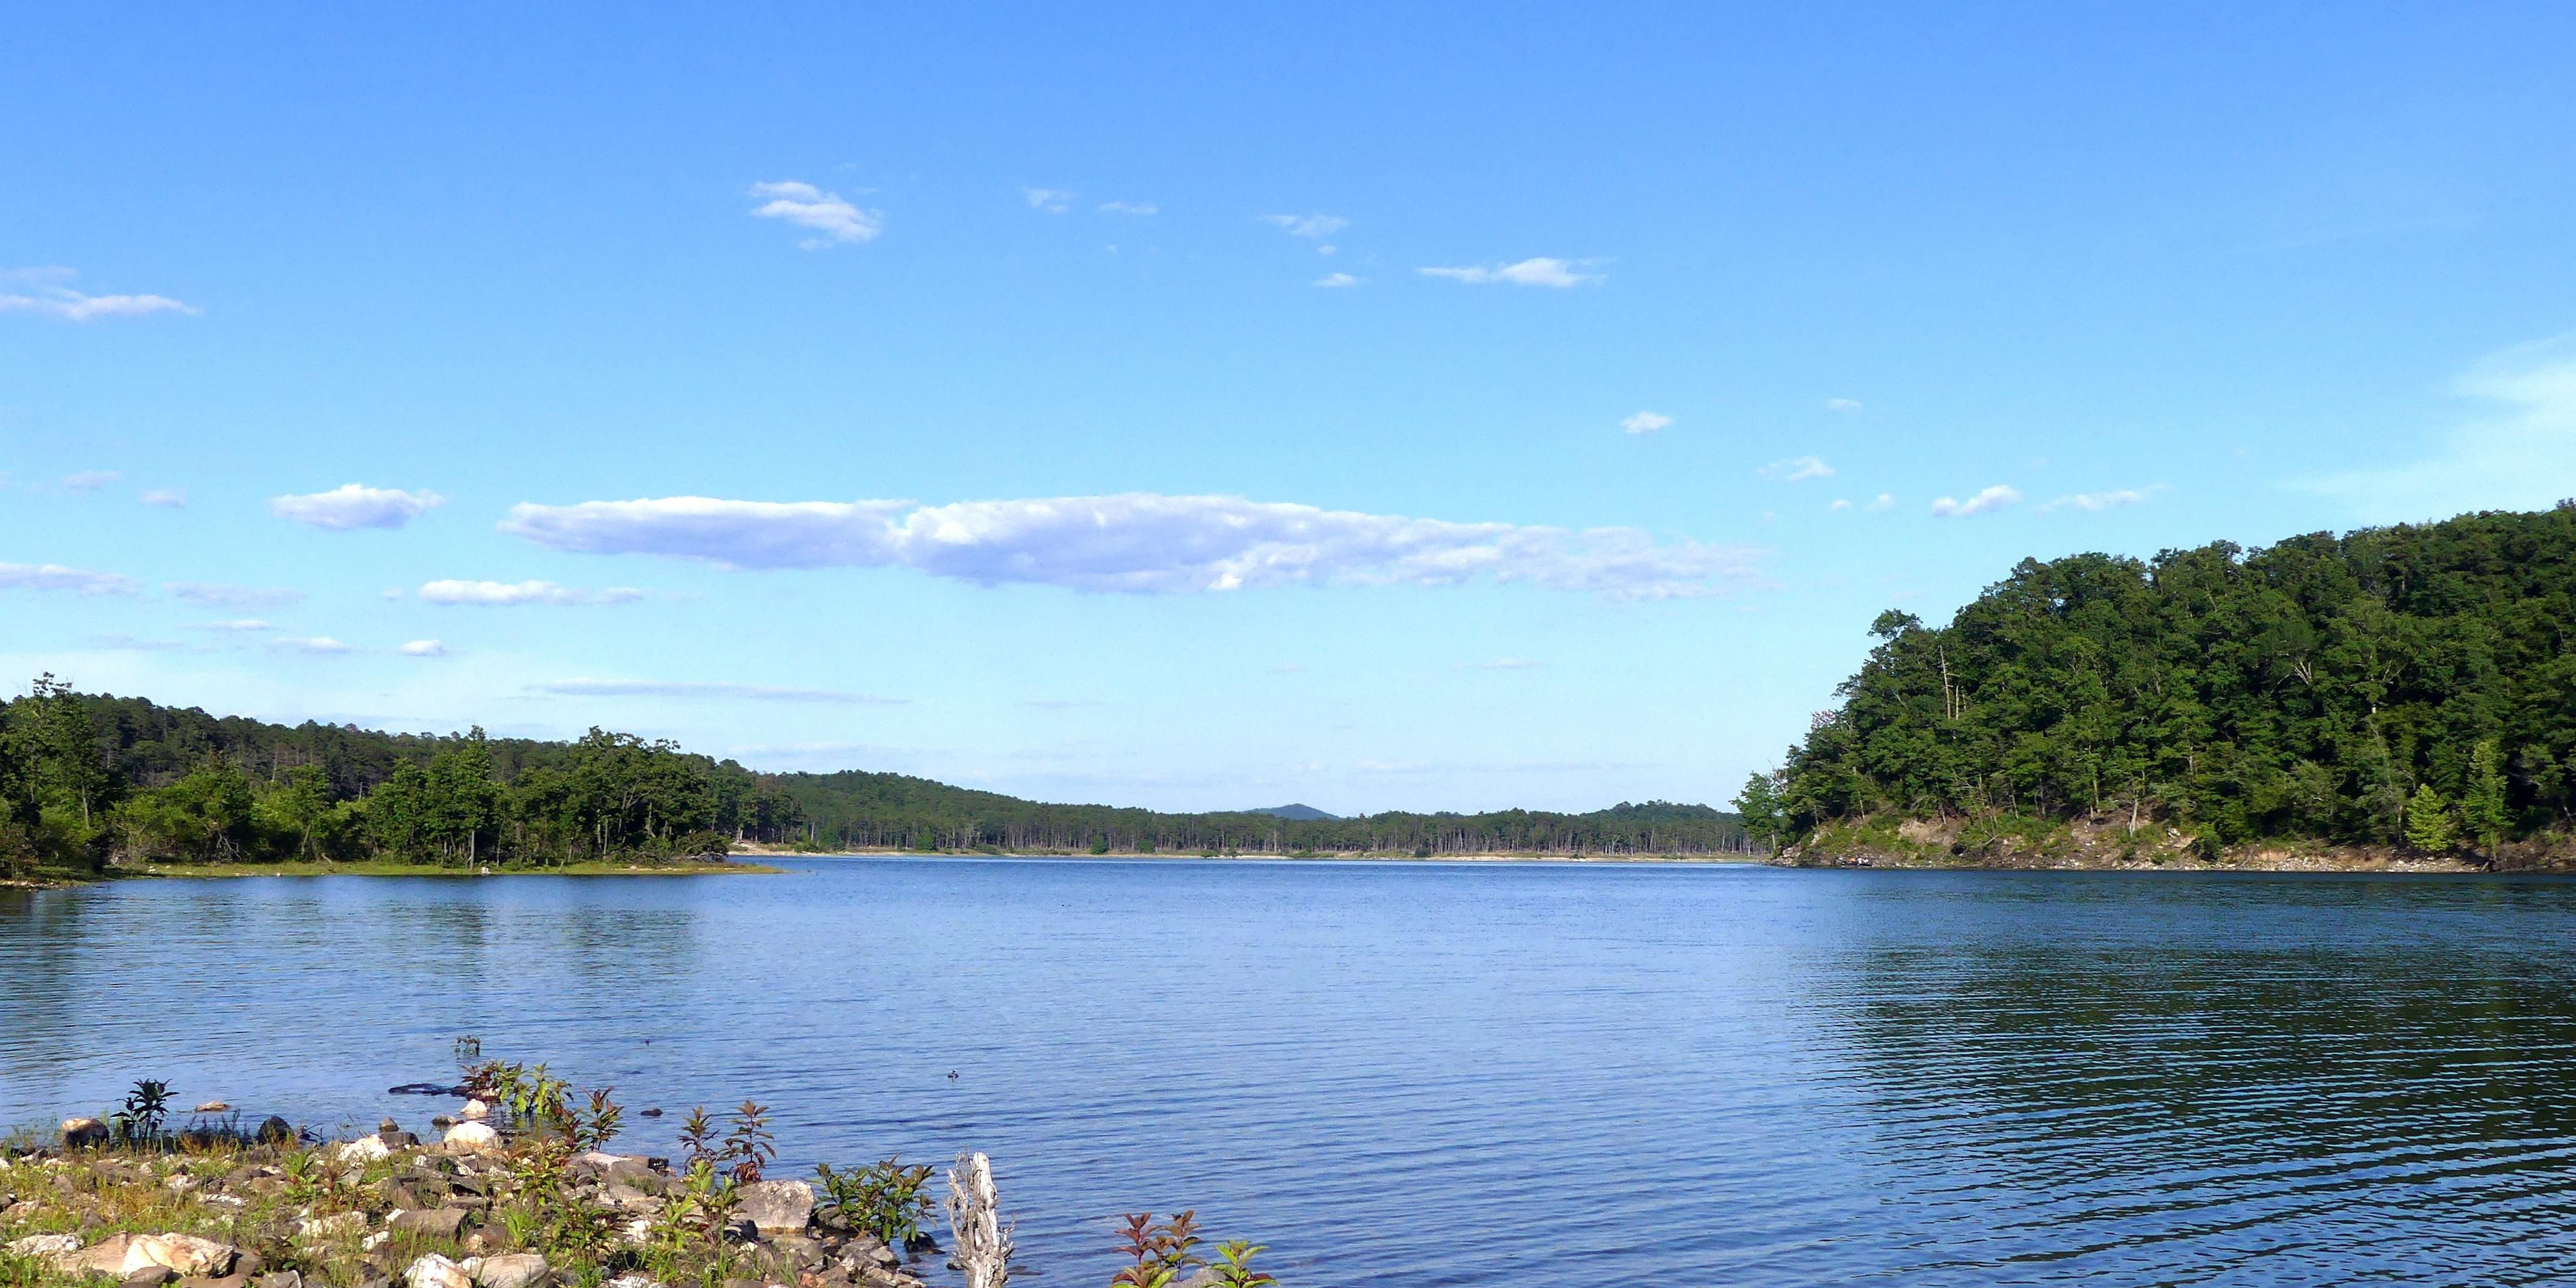 Enjoy our proximity to Lake Eufaula where the serene beauty of the lake is matched by what there is to do there: parasailing, skiing, boating, bird watching, hunting and some of the best fishing around.